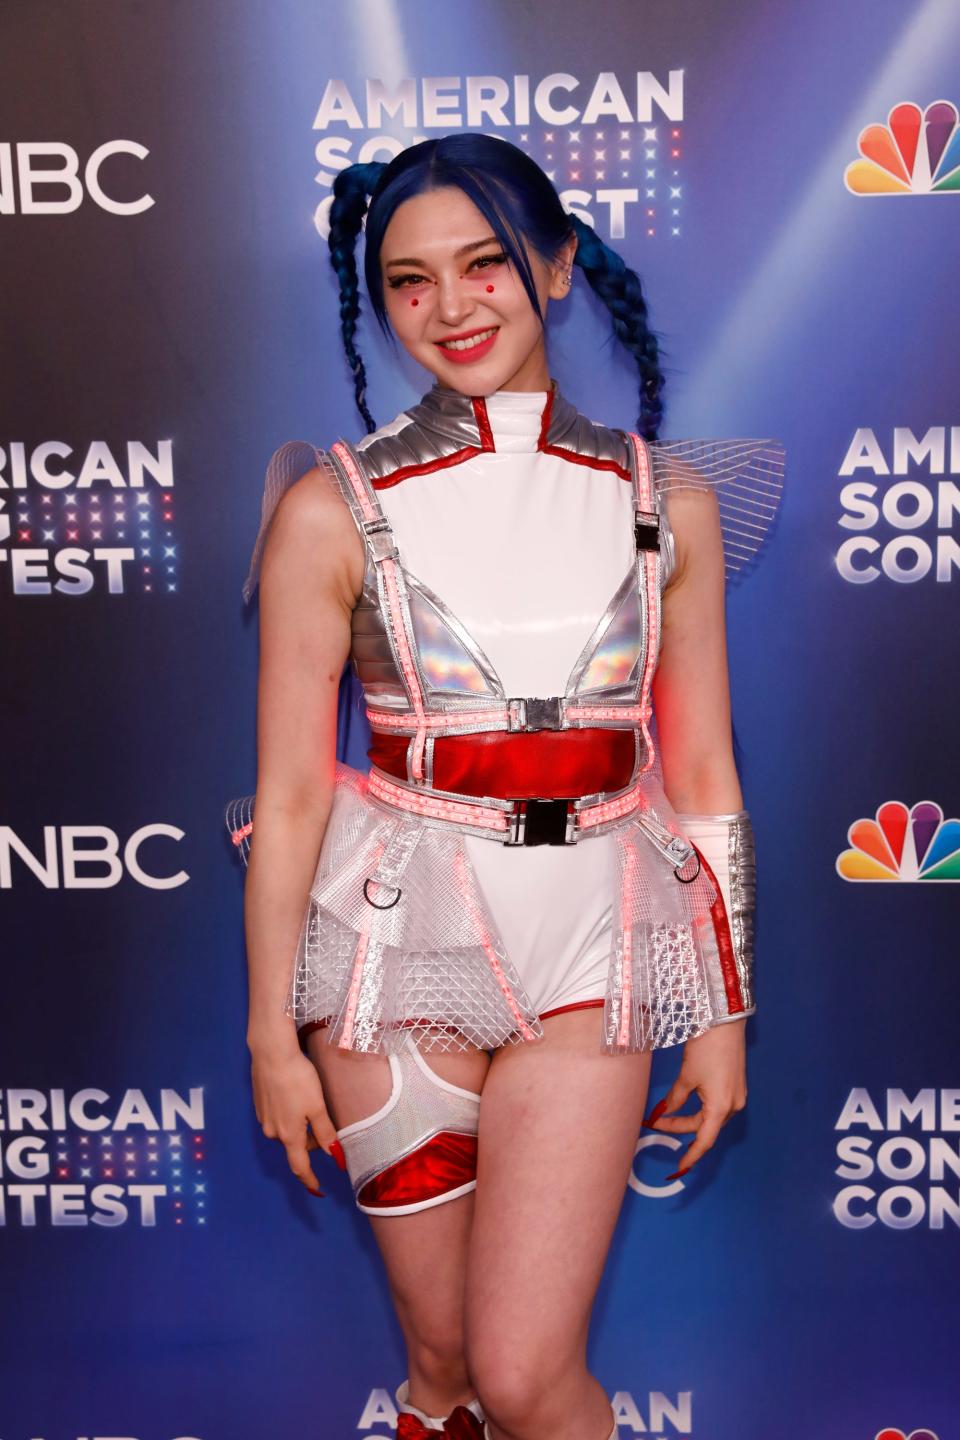 Rising K-Pop star AleXa, who grew up in Jenks, poses for a photo before the live semifinals of the NBC show "American Song Contest," where she is representing Oklahoma. She will compete on the finals May 9 on NBC.